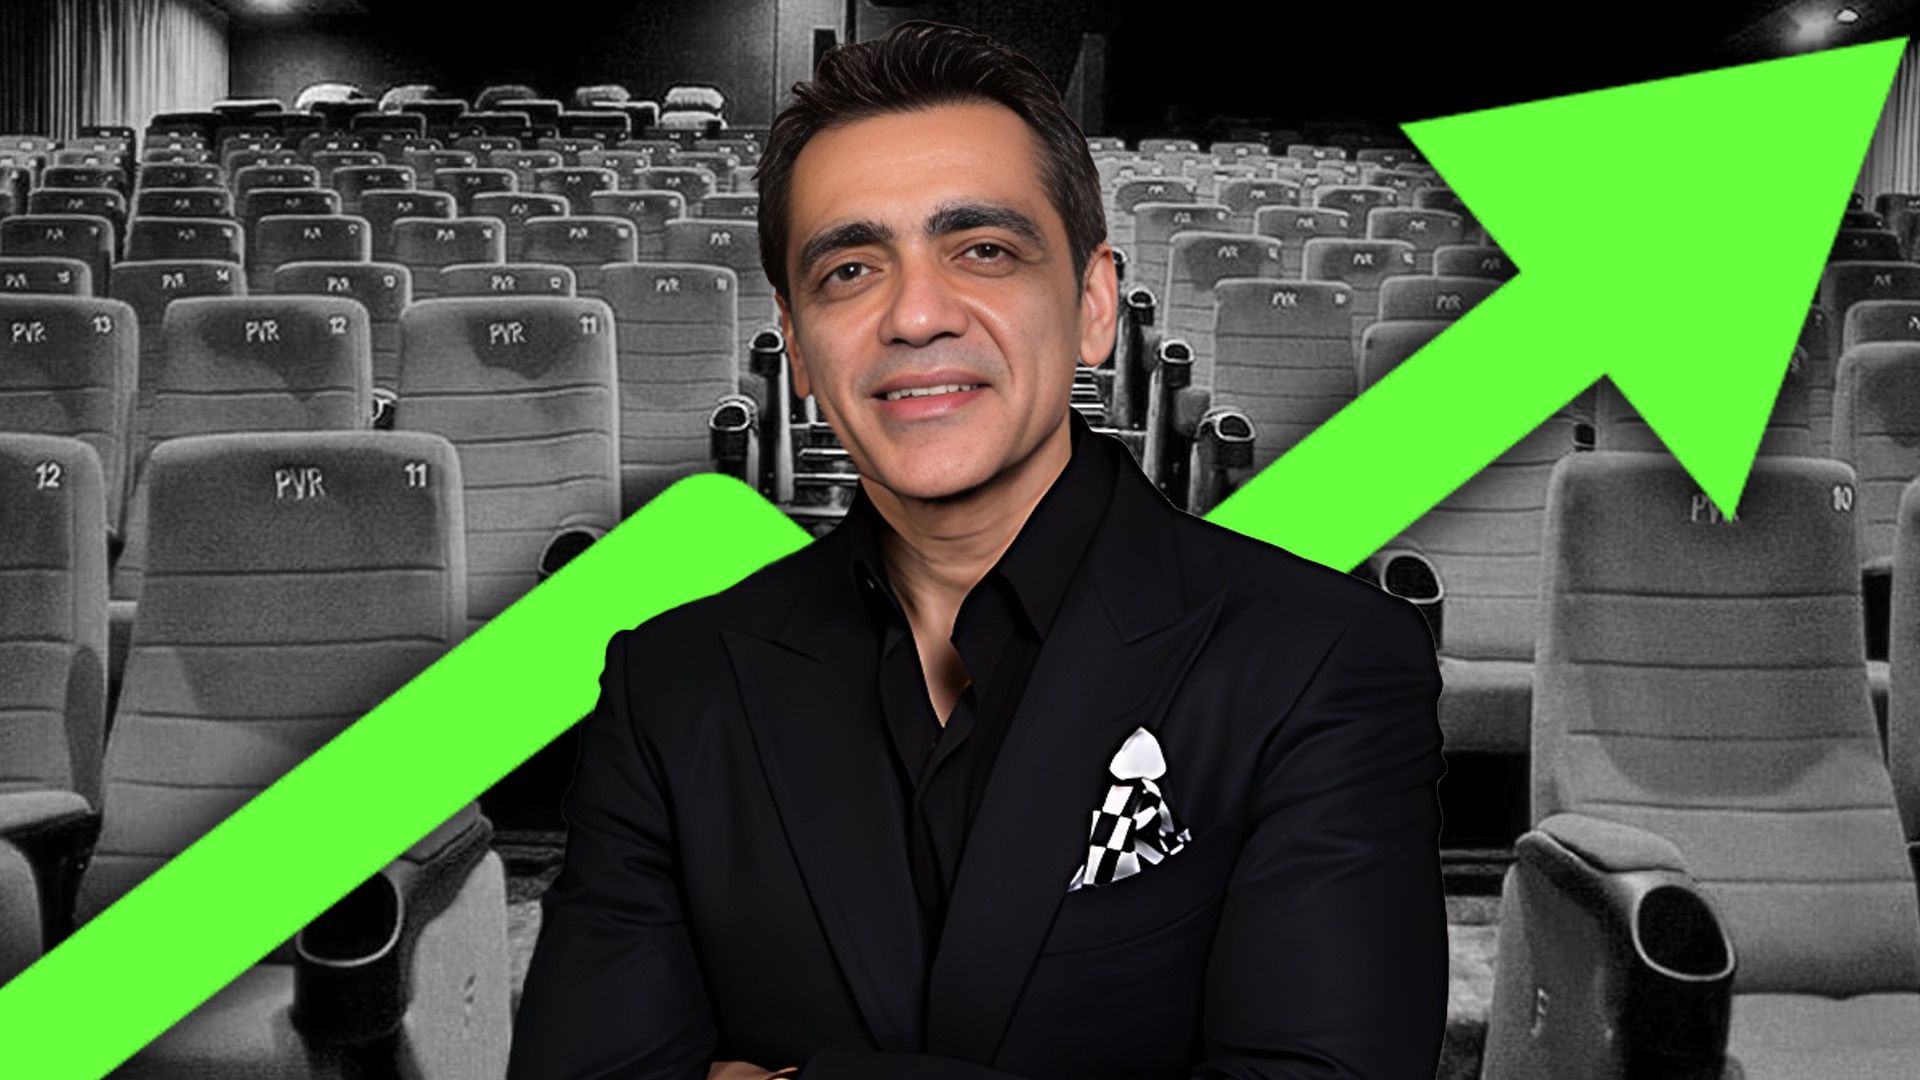 From 2019’s historic highs to the pandemic’s baptism by fire: How PVR Cinemas lived and learned